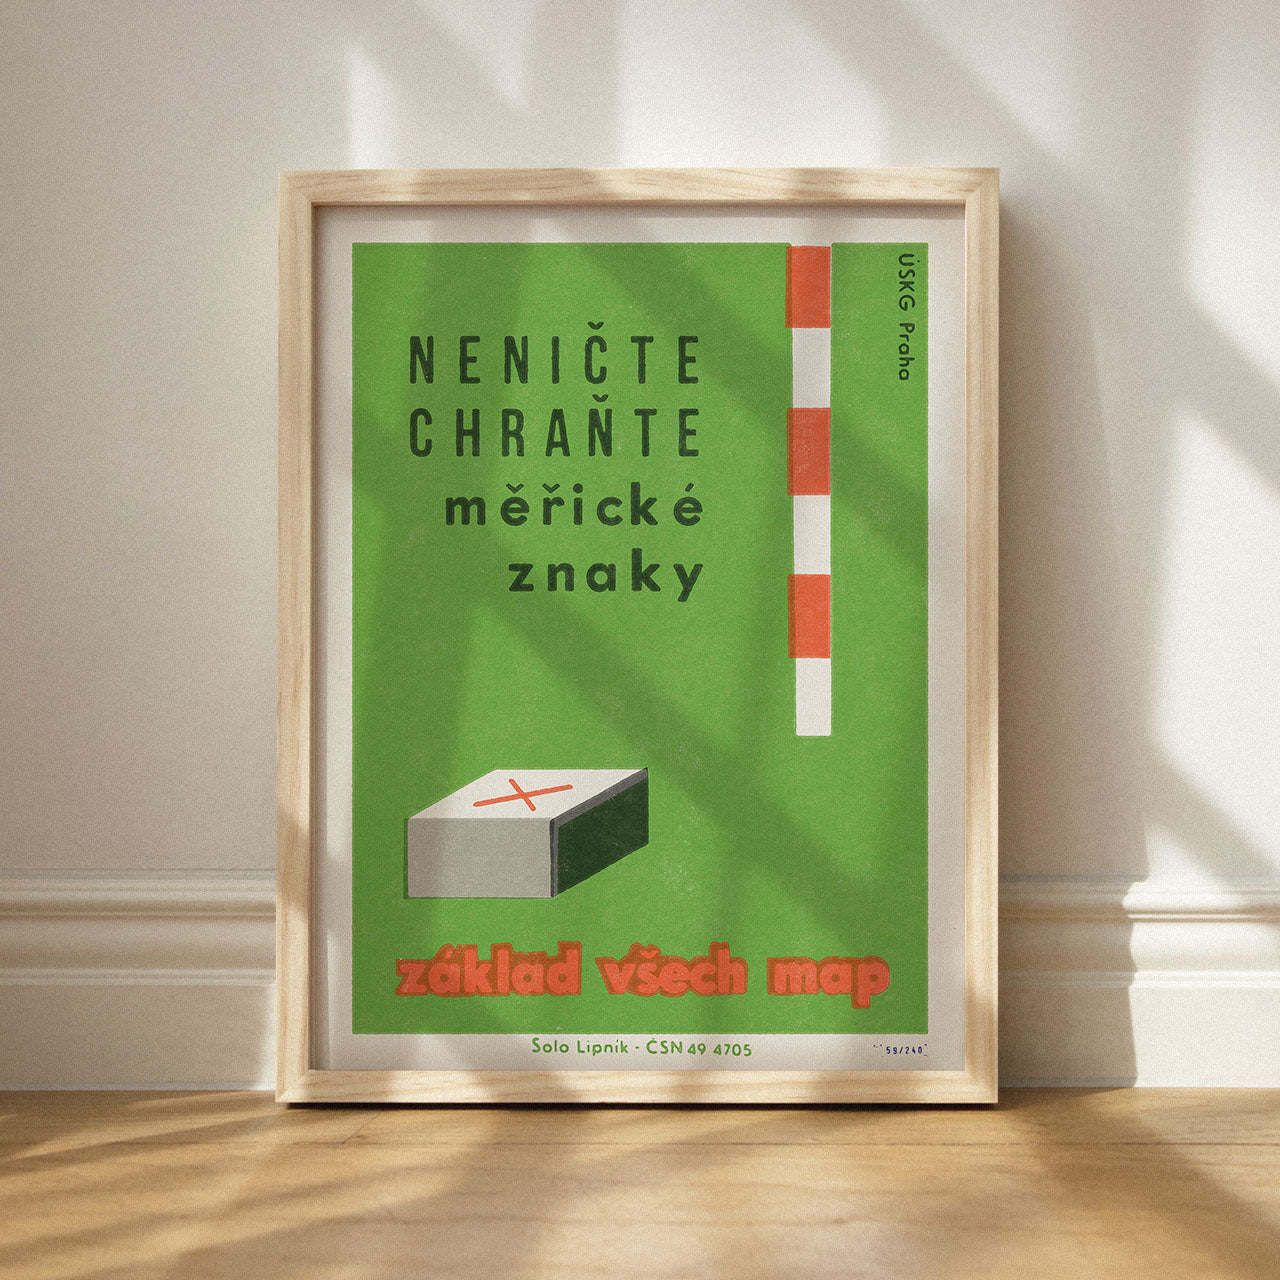 Do not destroy - protect measuring signs - Poster 30x40 cm 